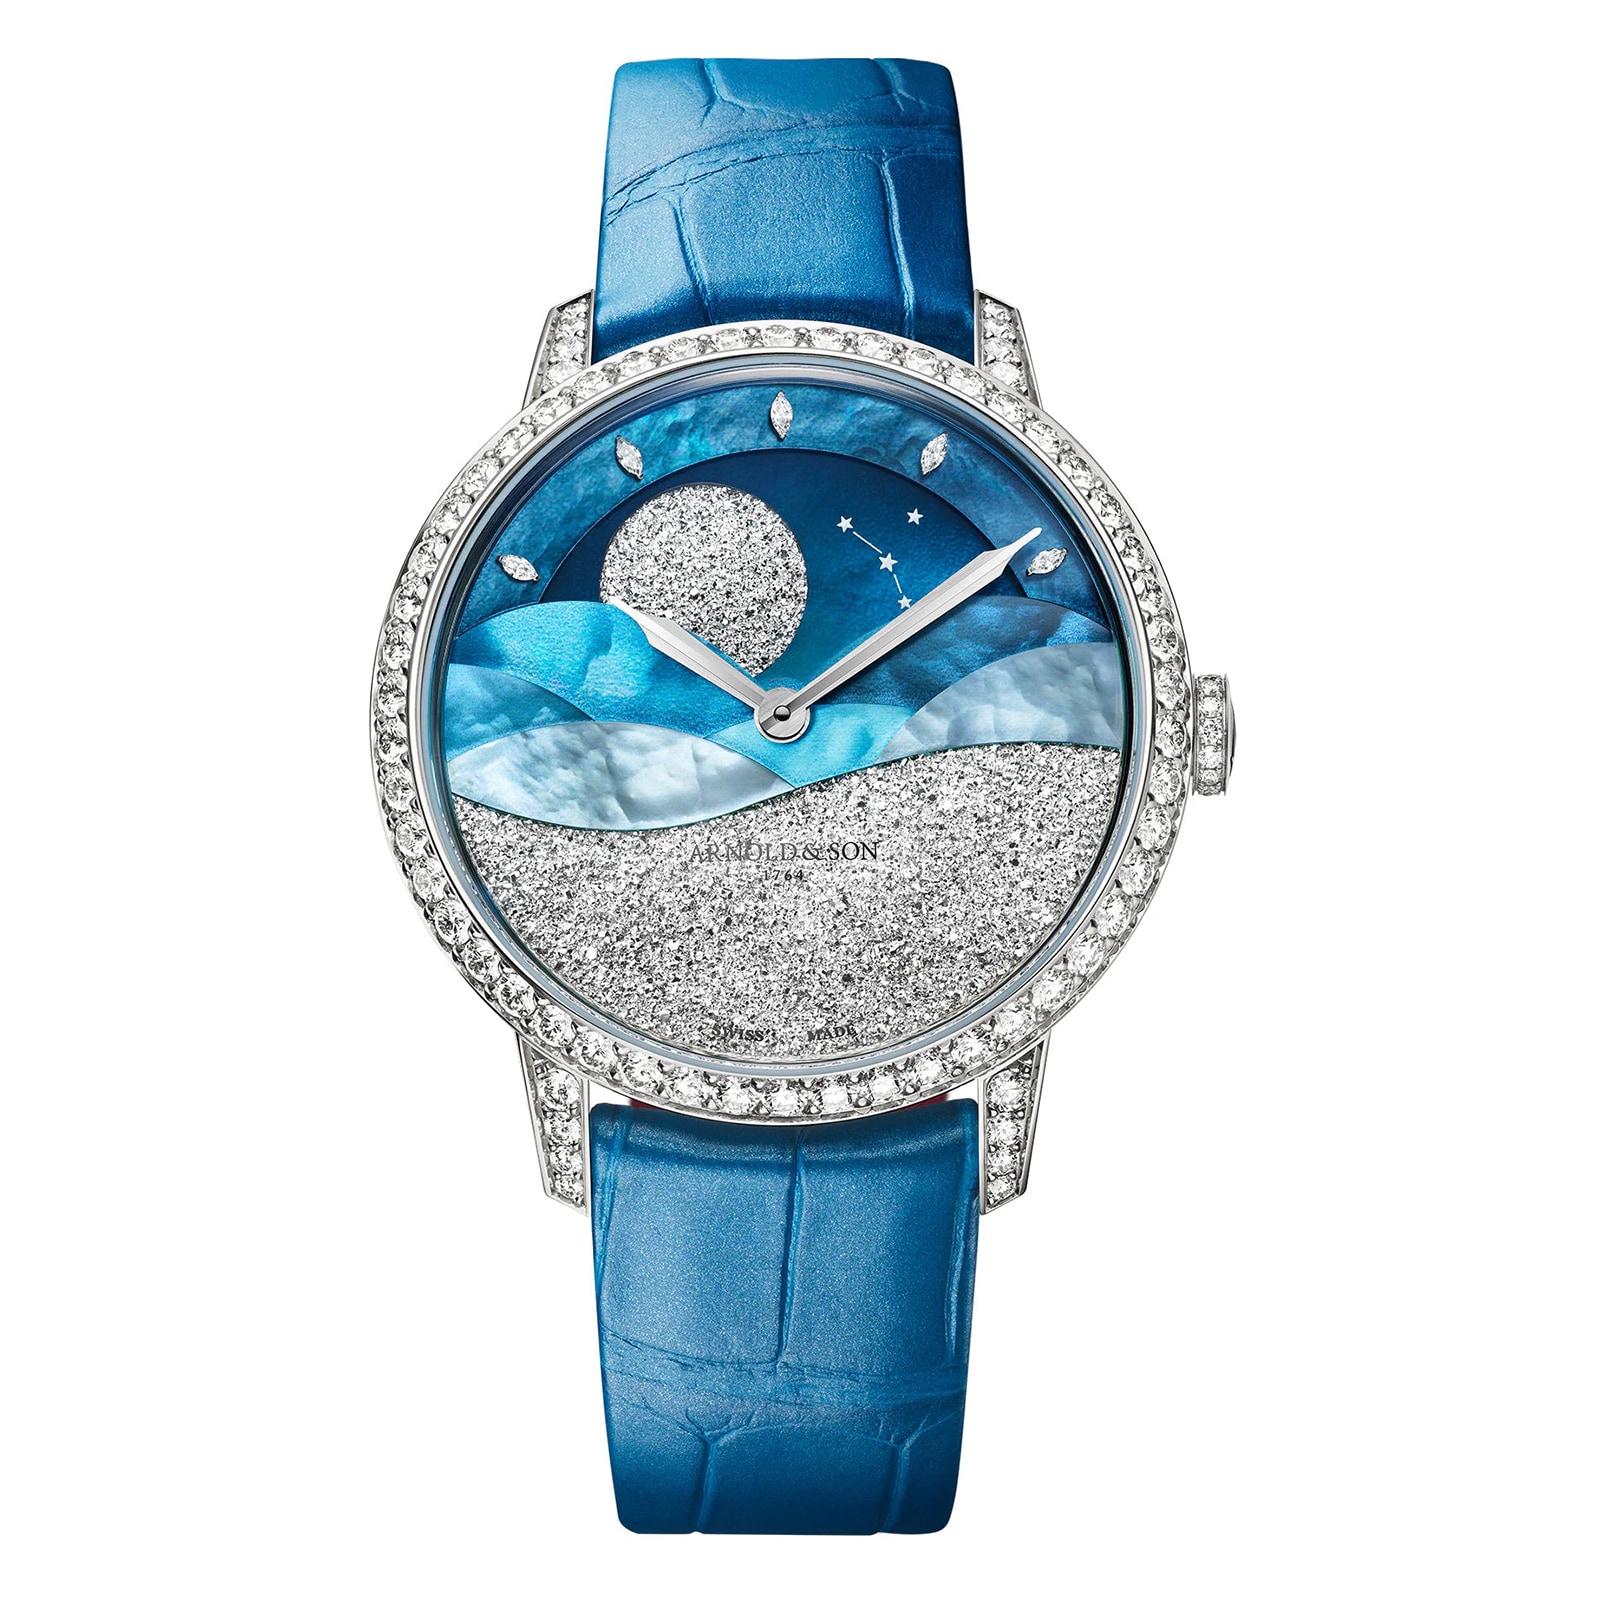 Perpetual Moon 38mm Limited Edition Mens Watch Blue